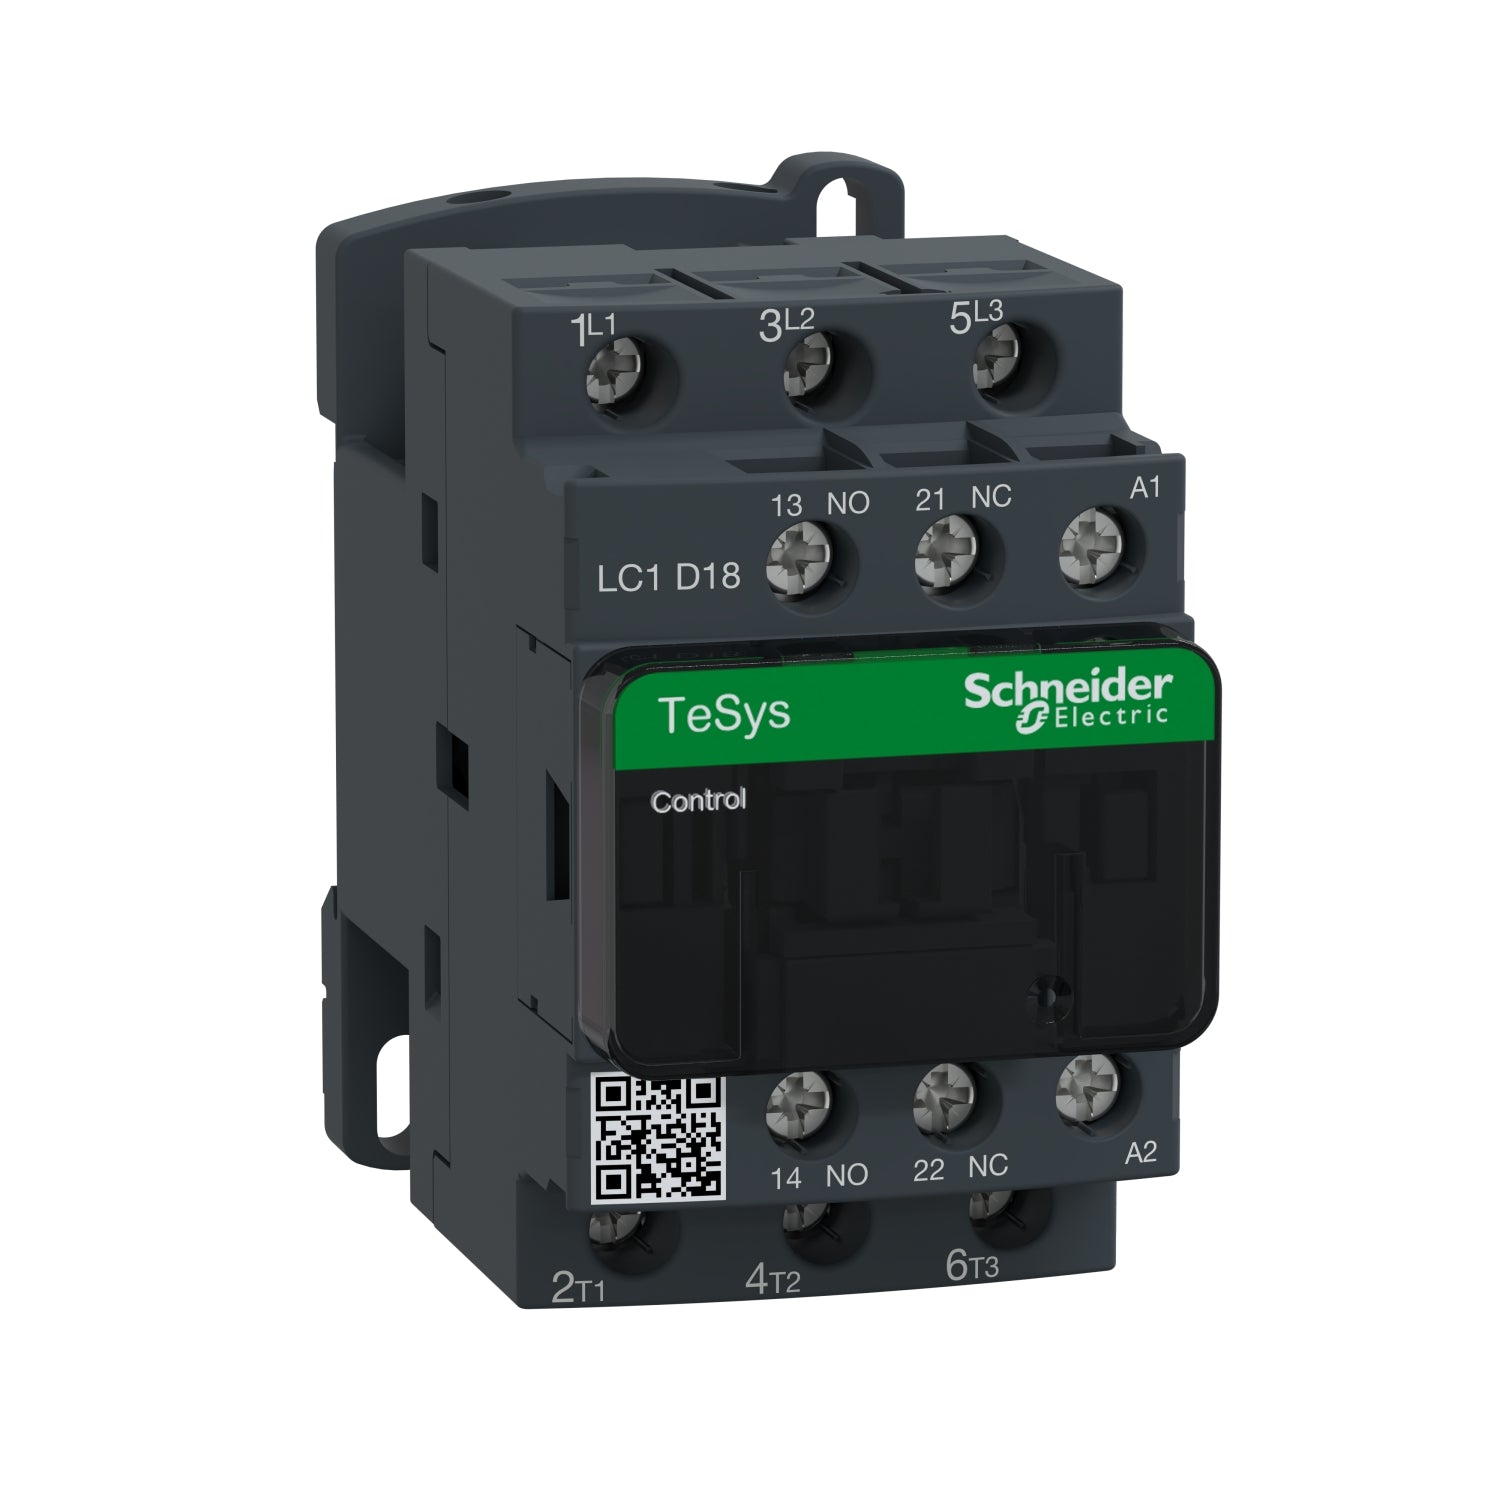 Schneider LC1D18 TeSys D Contactor, 3P (3 NO) AC-3 18 A 220 V AC Coil Price in Pakistan